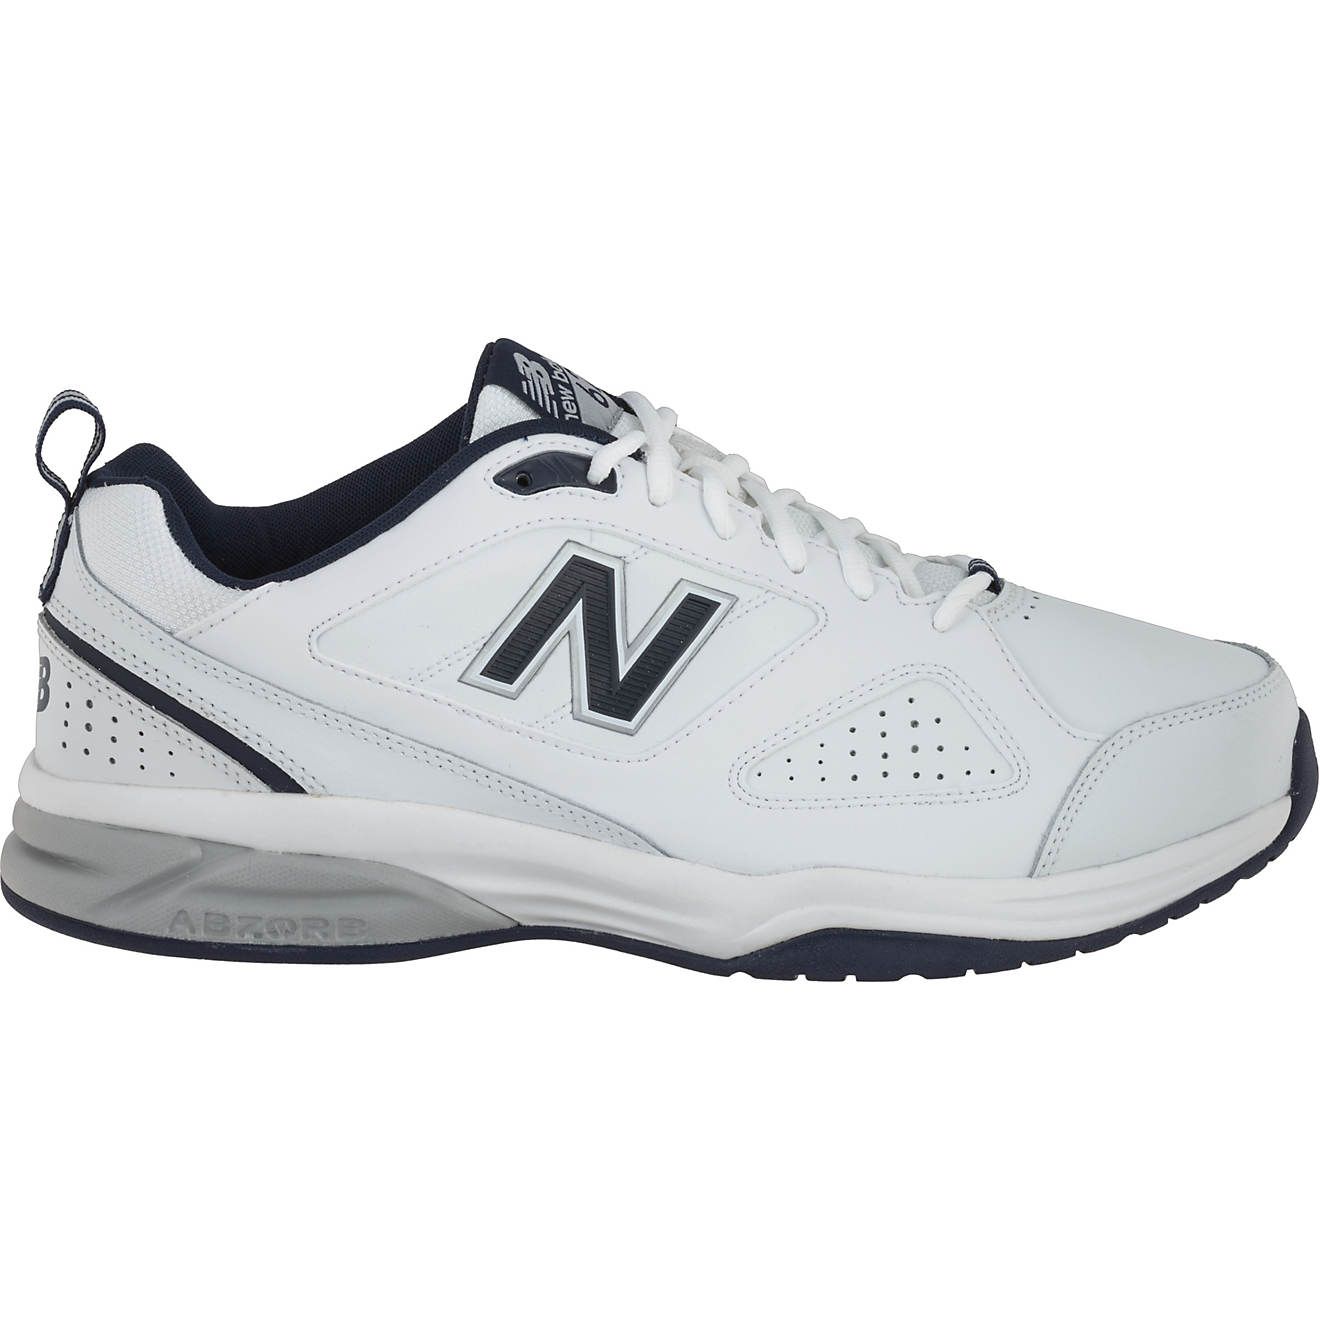 New Balance Men's 623 Training Shoes | Academy | Academy Sports + Outdoors